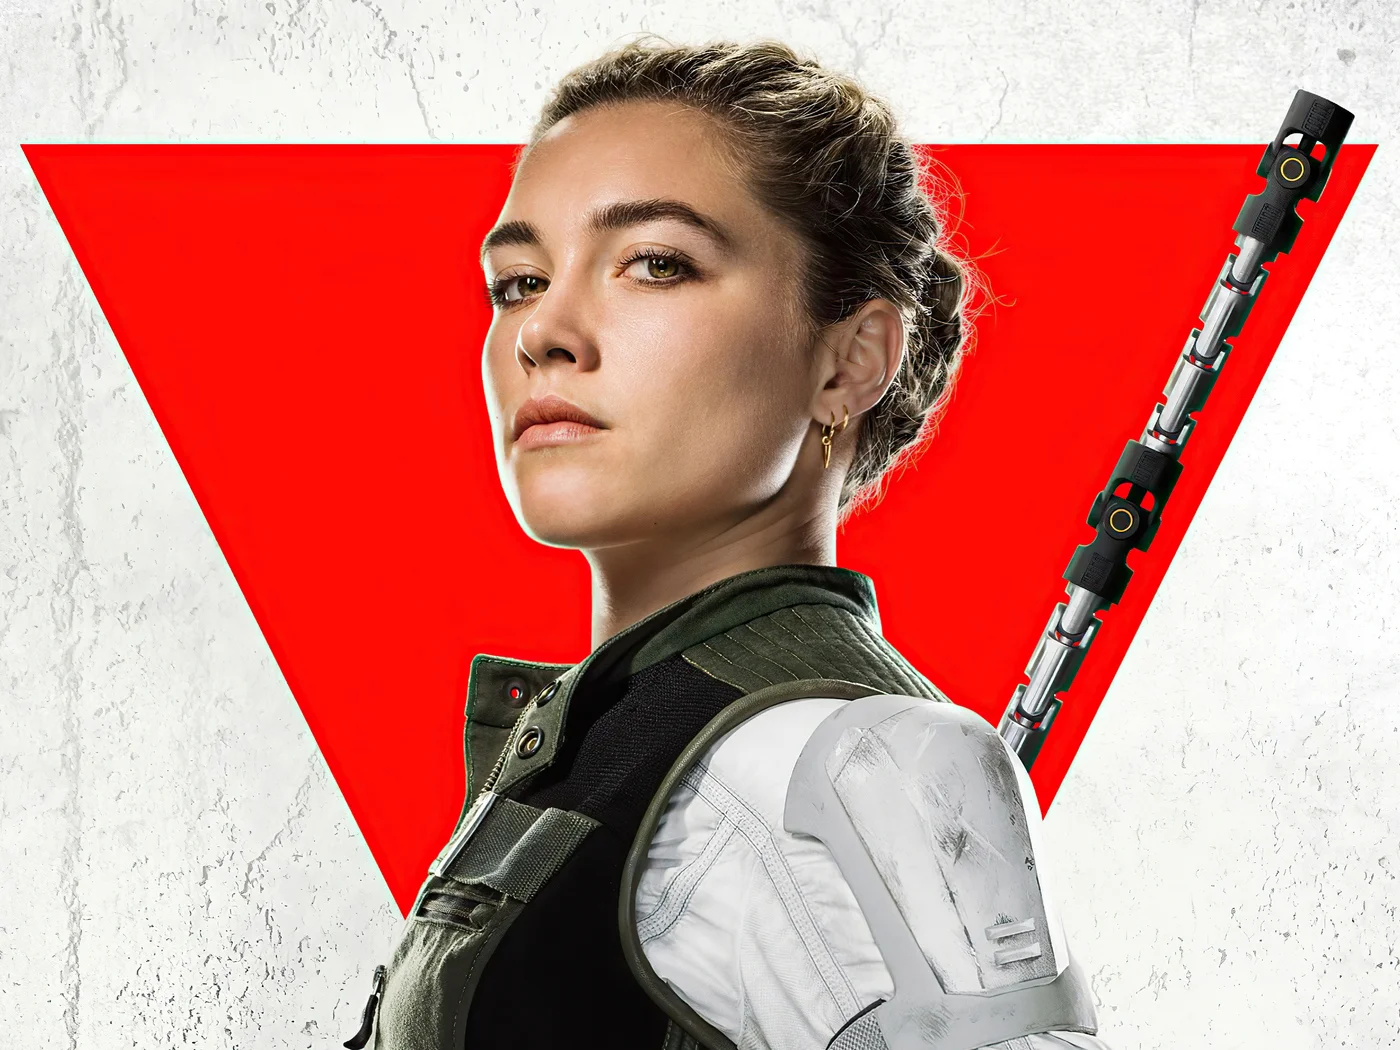 Florence Pugh may play the role of Abby in the second season of The Last of Us